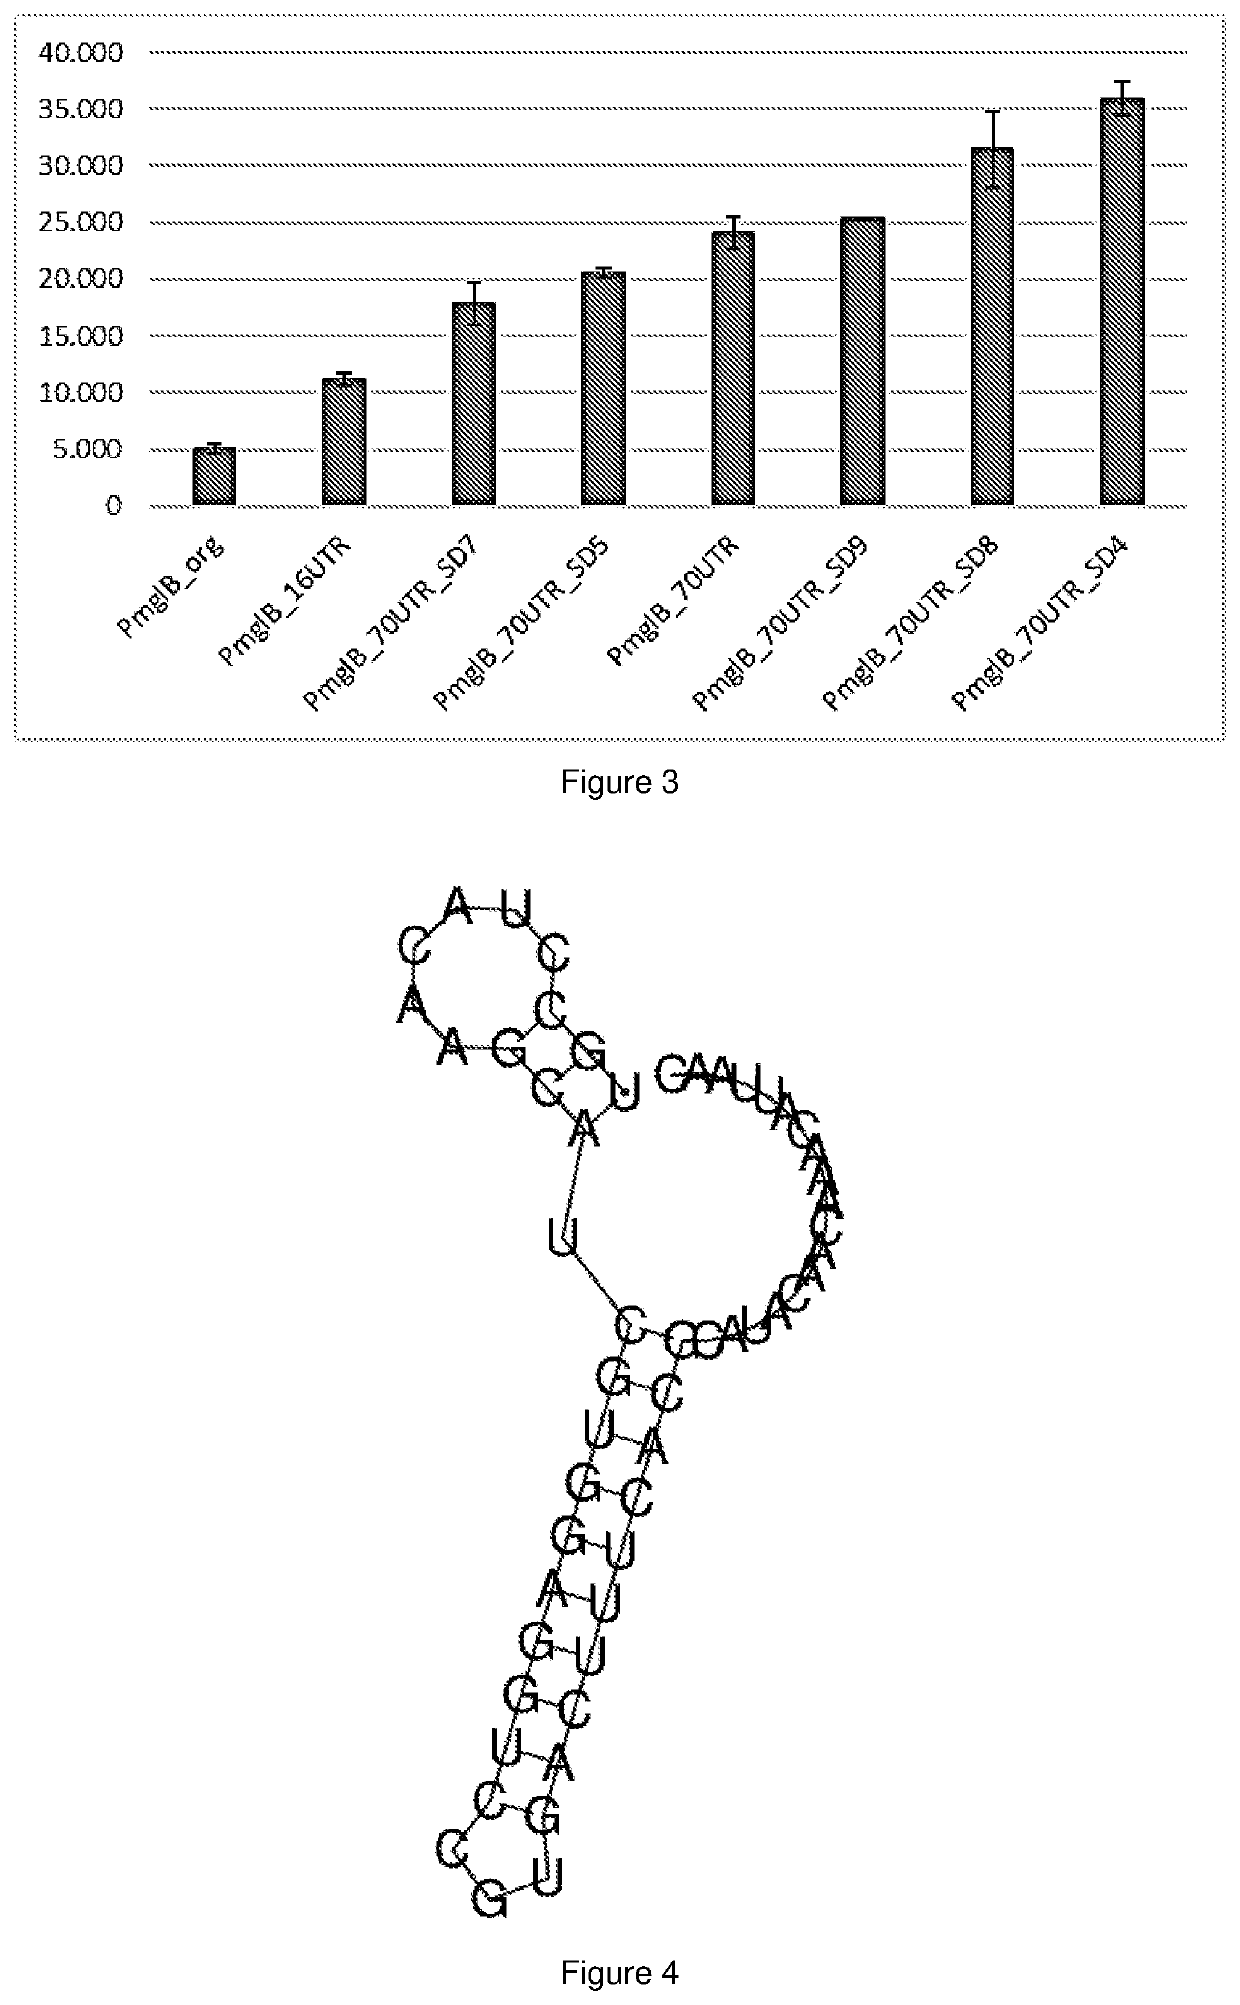 Nucleic acid construct comprising 5' utr stem-loop for in vitro and in vivo gene expression